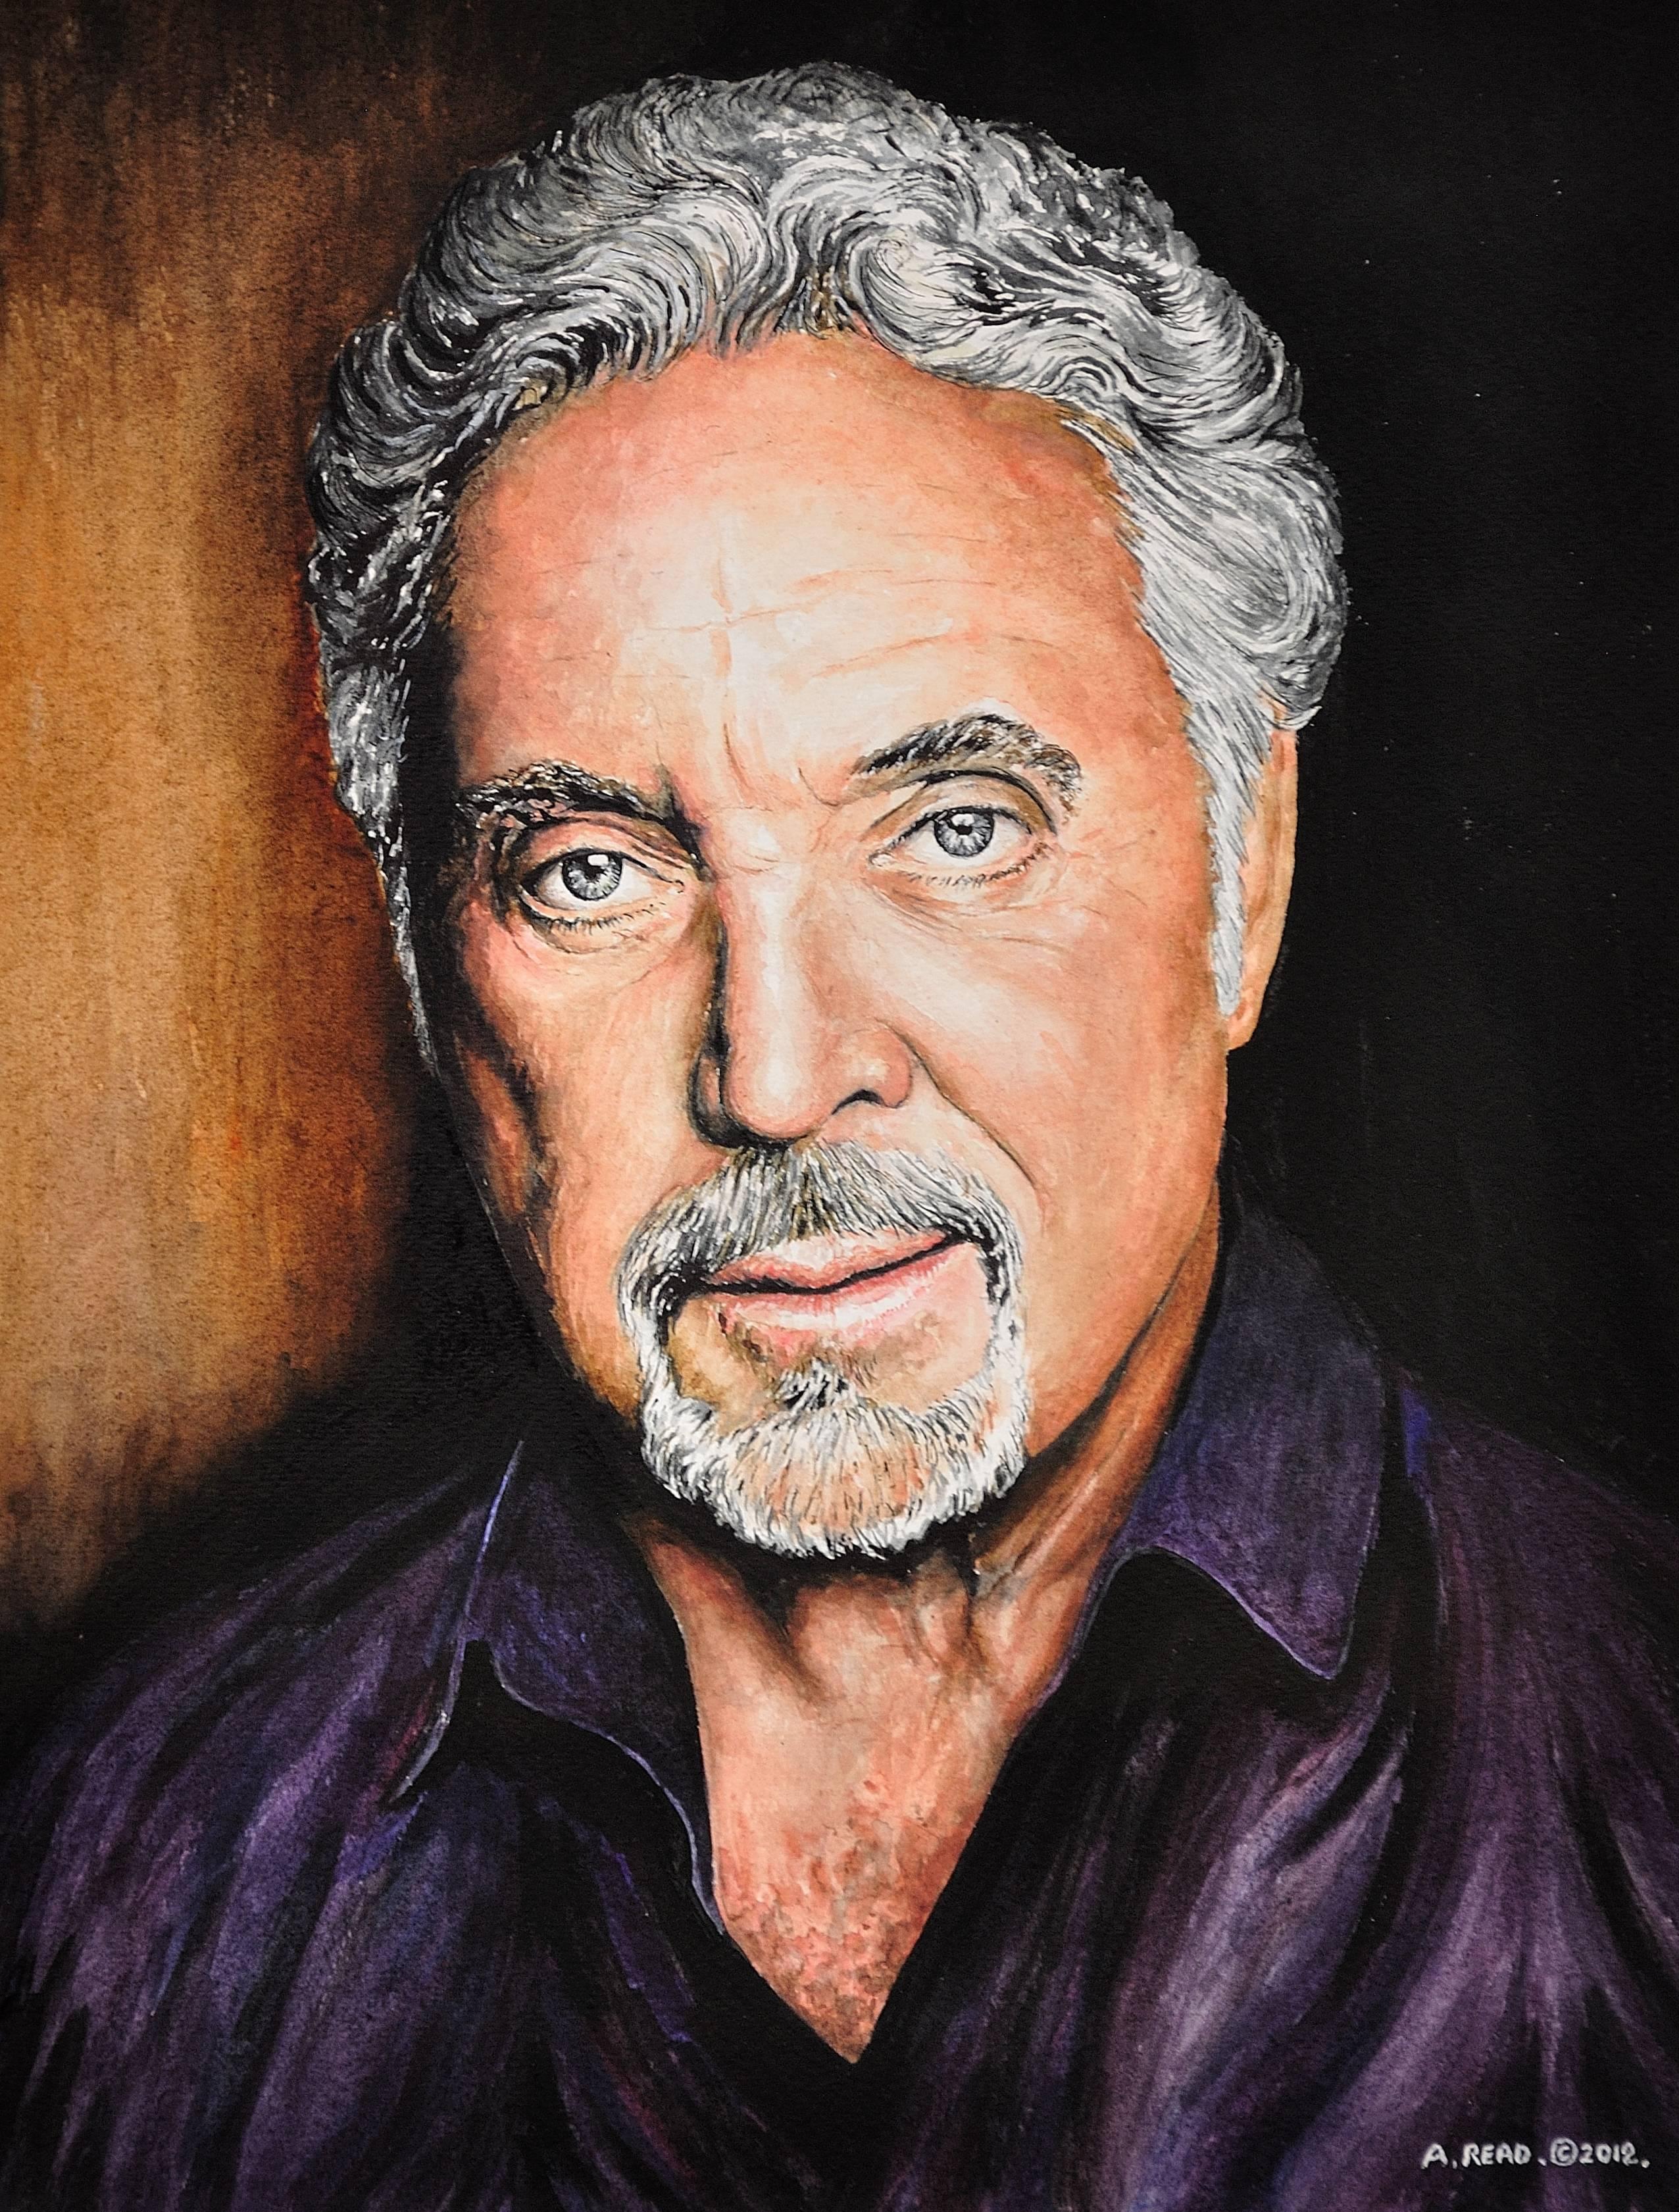 Tom Jones. Brilliant and popular as ever and is truly The Voice! Team Tom. - Art by Andrew Read